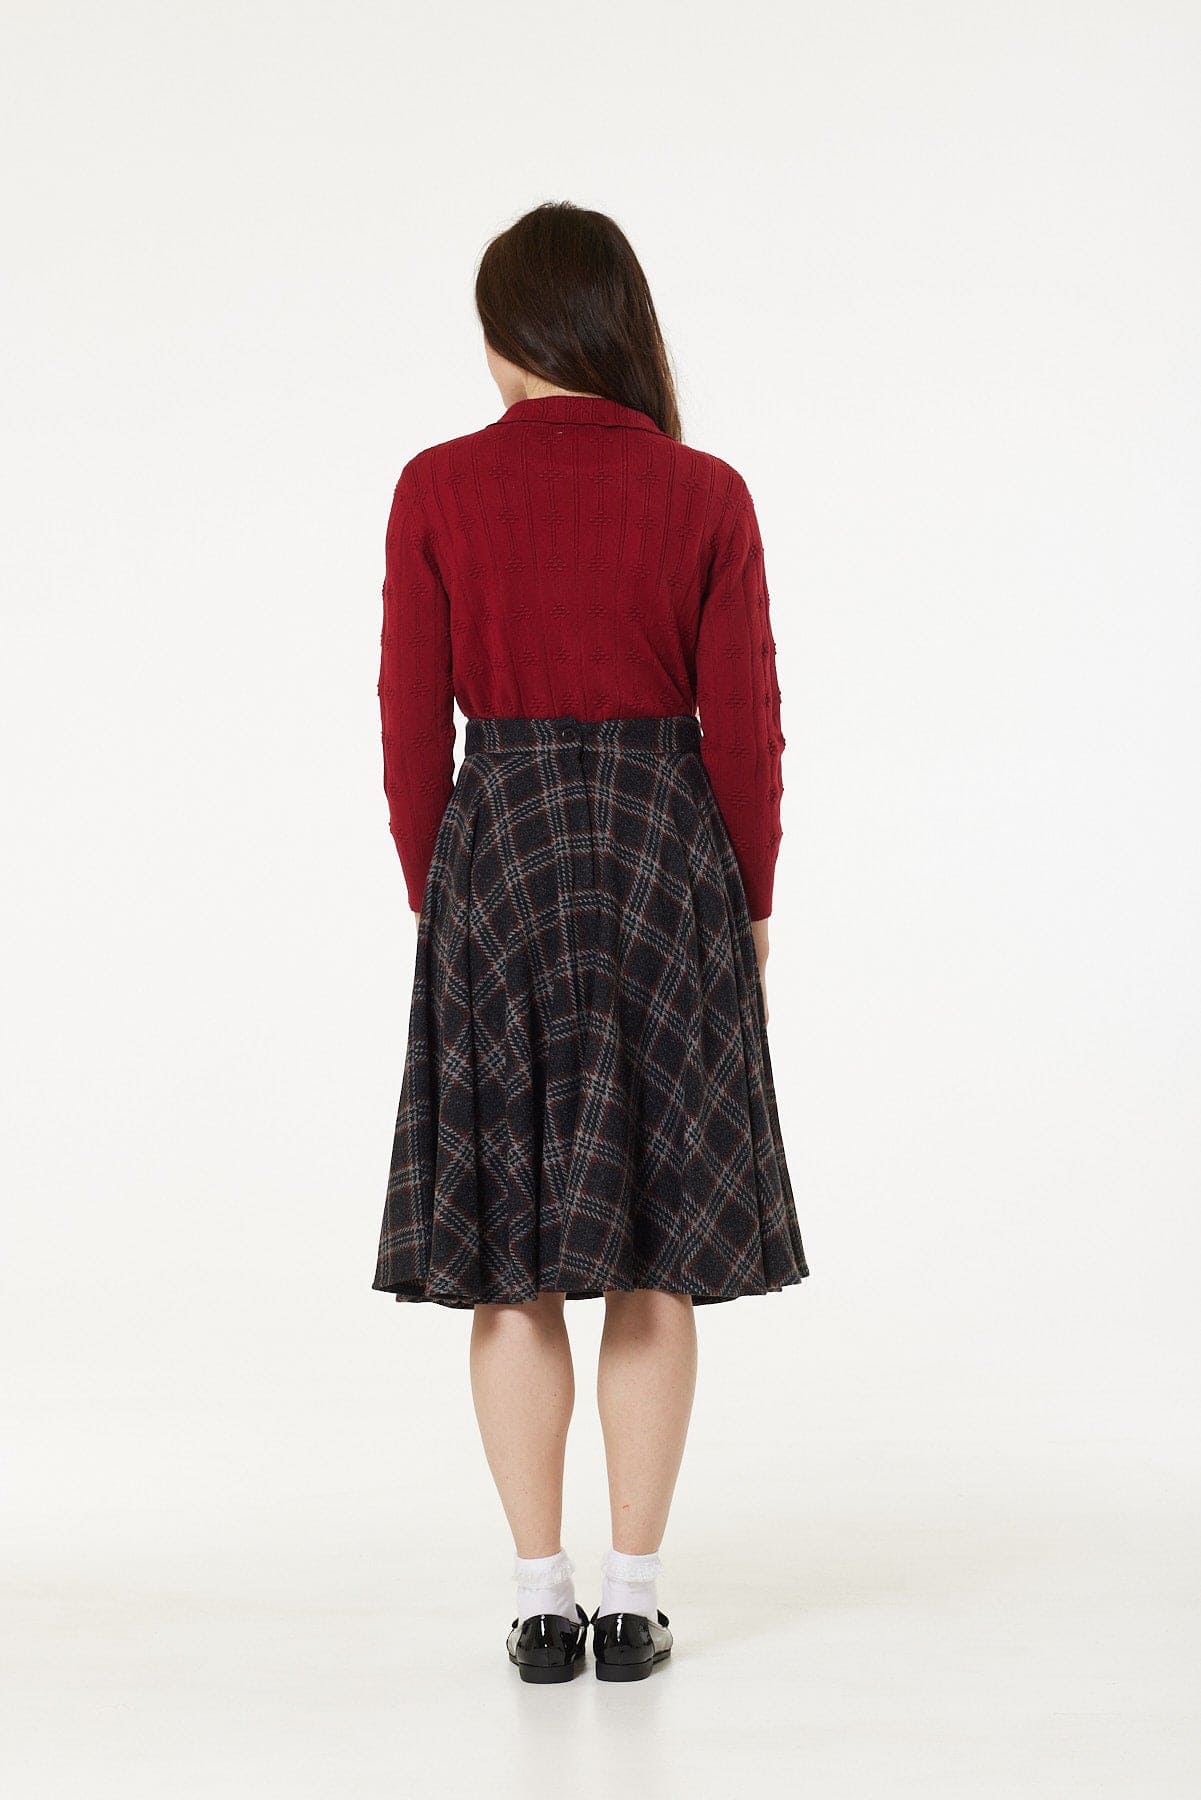 Sophie Black and Red Check Swing Skirt